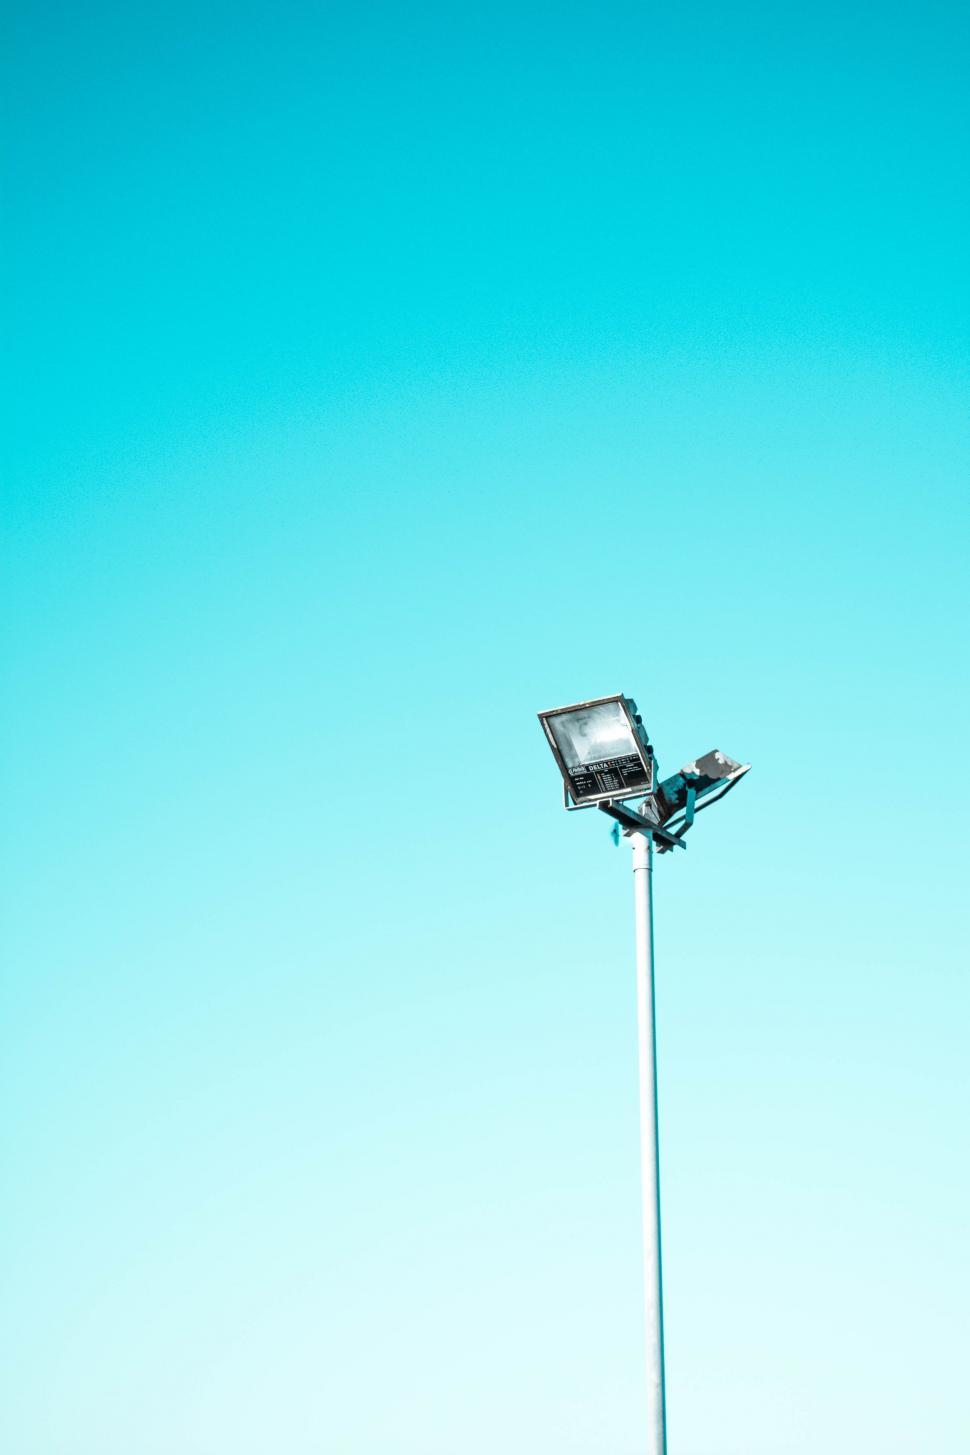 Free Image of Street Light With Laptop 